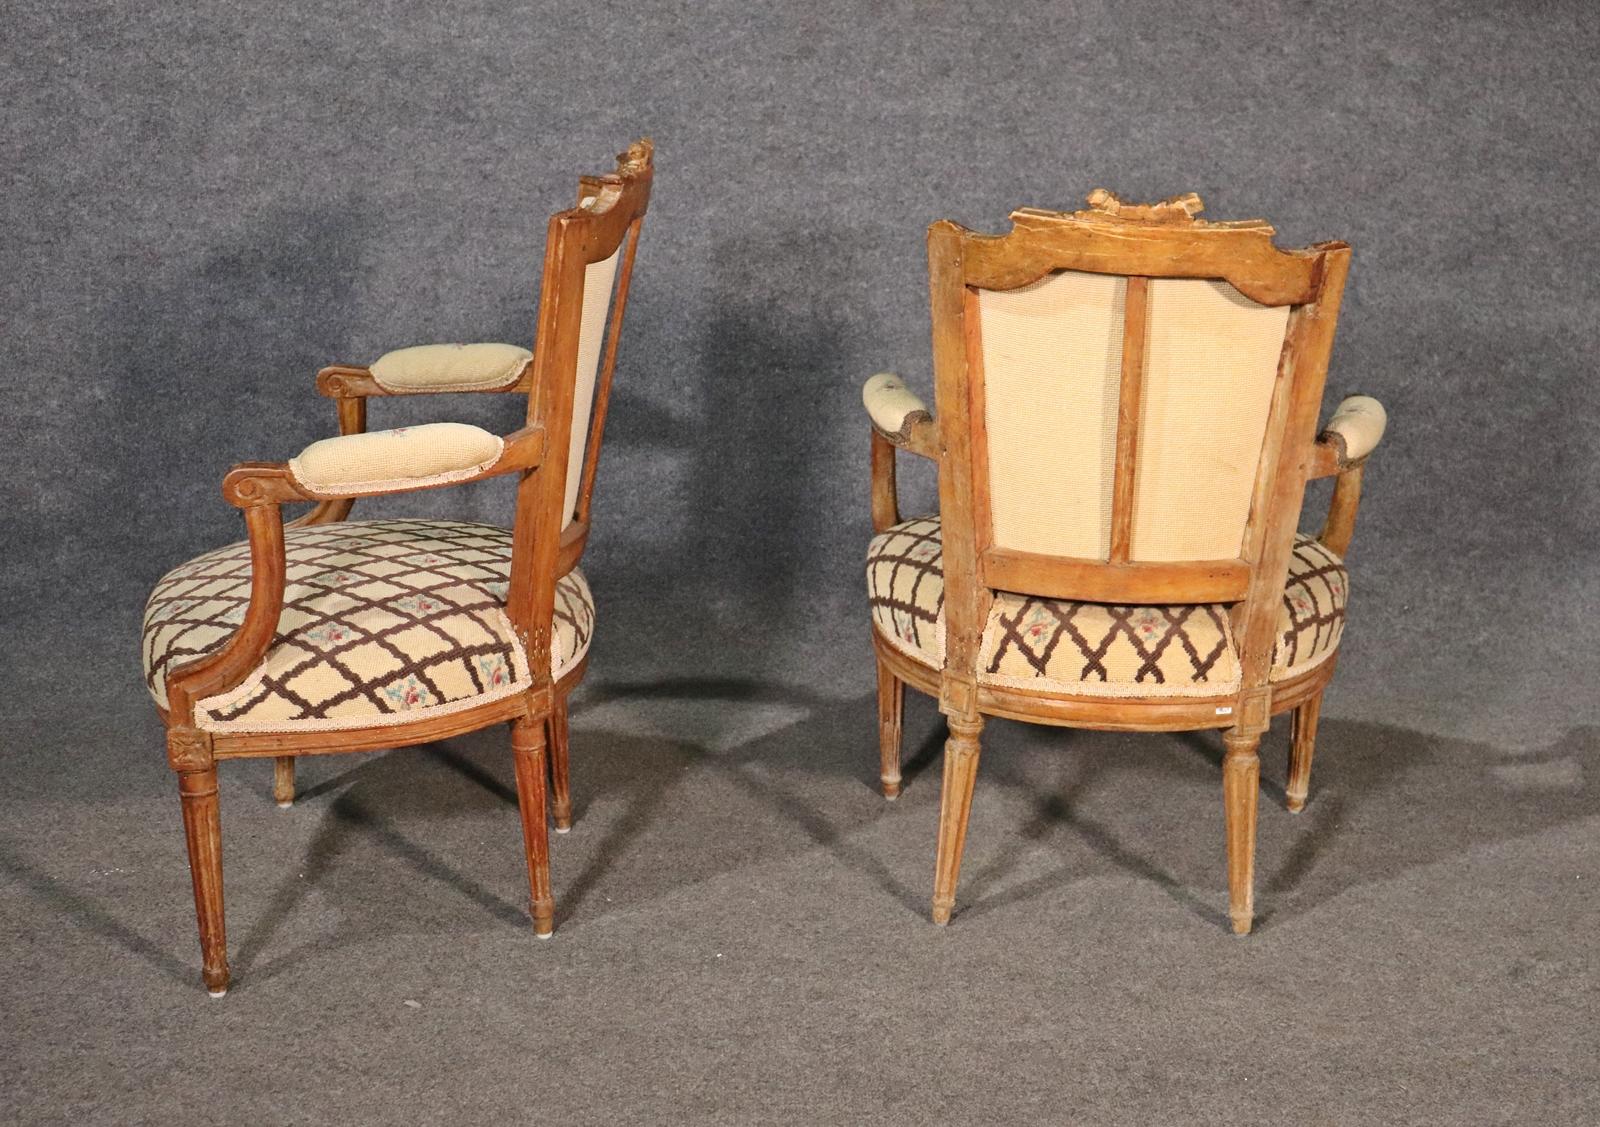 Companion Pair of Nearly Identical French Louis XVI Armchairs, Circa 1900 For Sale 2